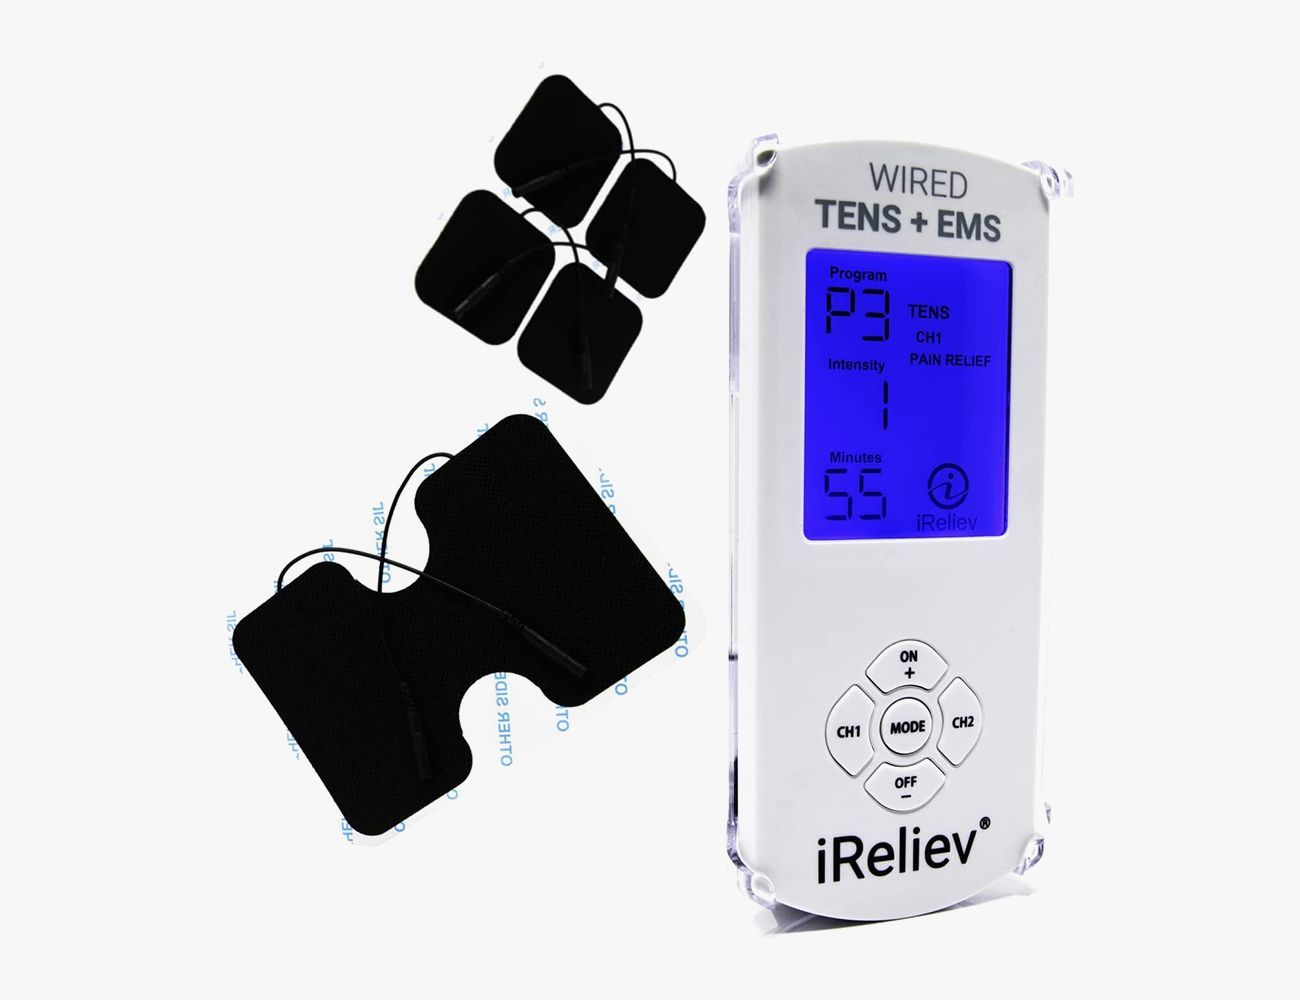 WiTouch Pro TENS Unit for Back Pain Relief soothes discomfort in